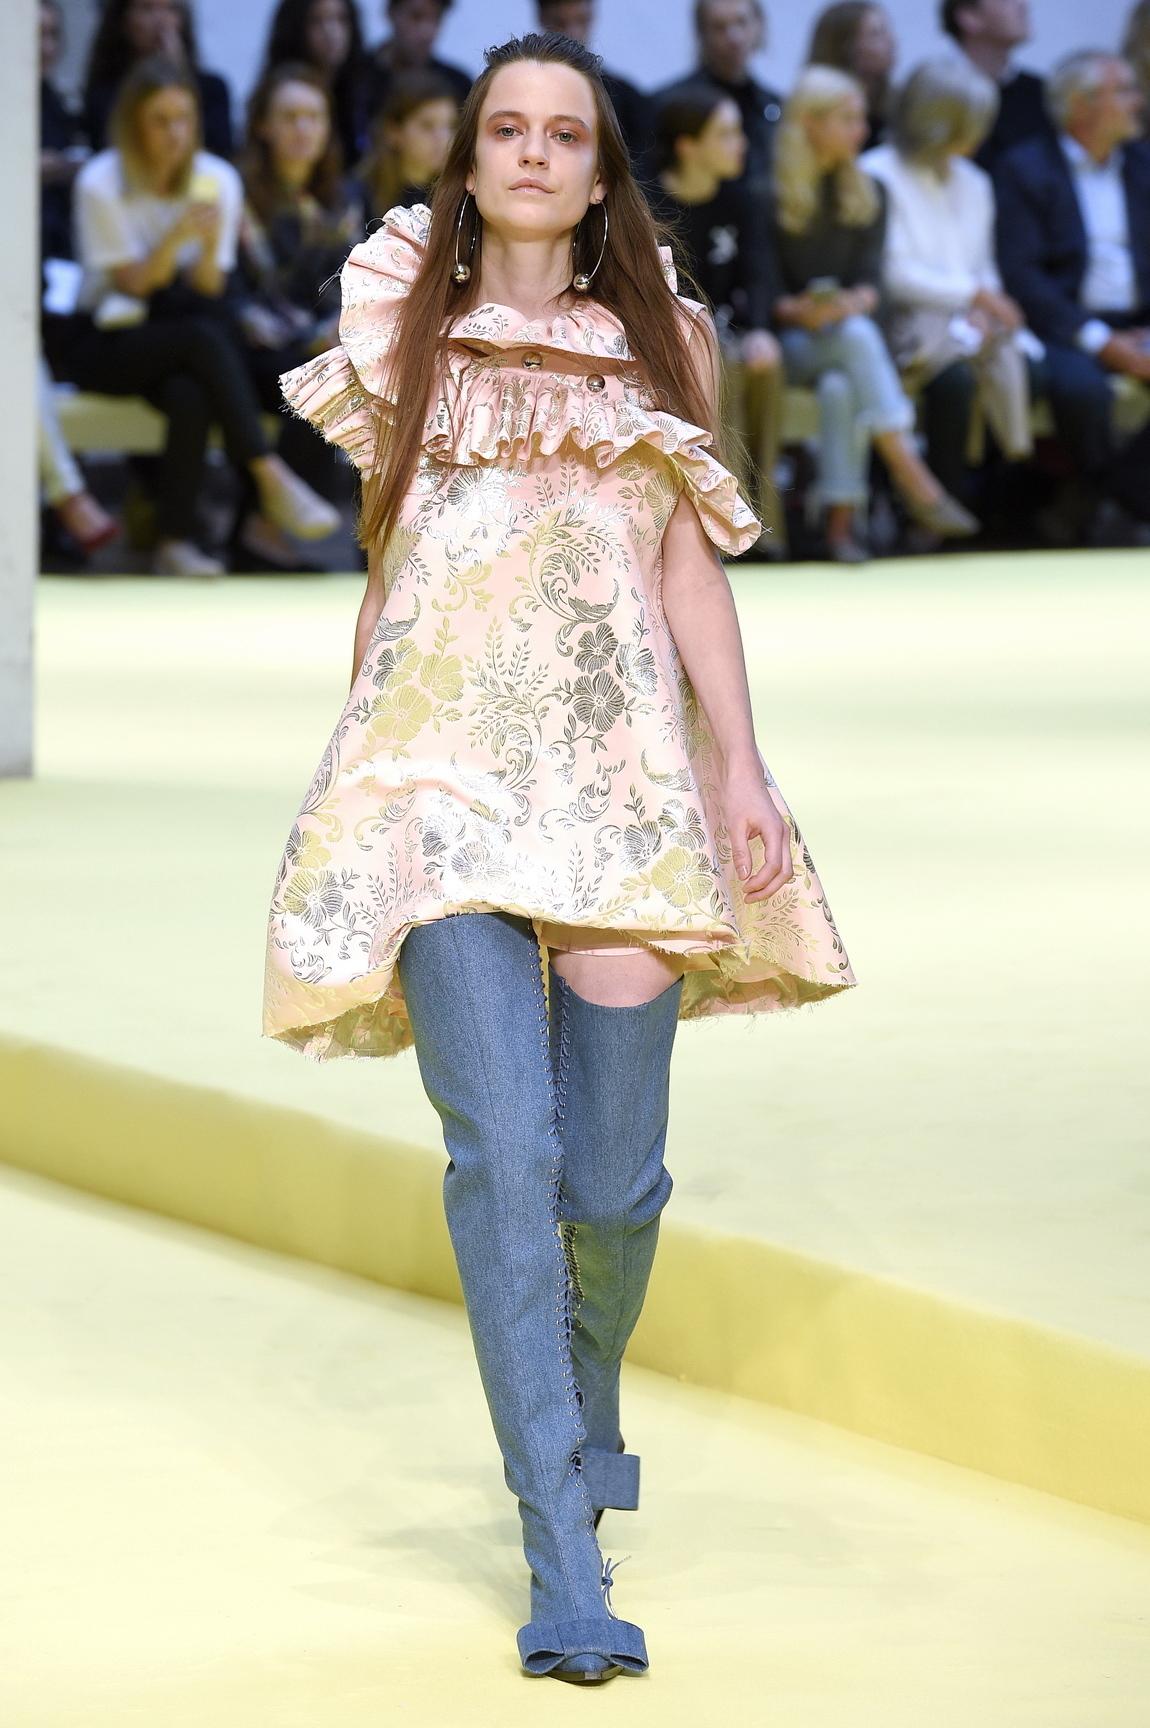 rebel girl, you are the queen of my world: marques’almeida spring ...